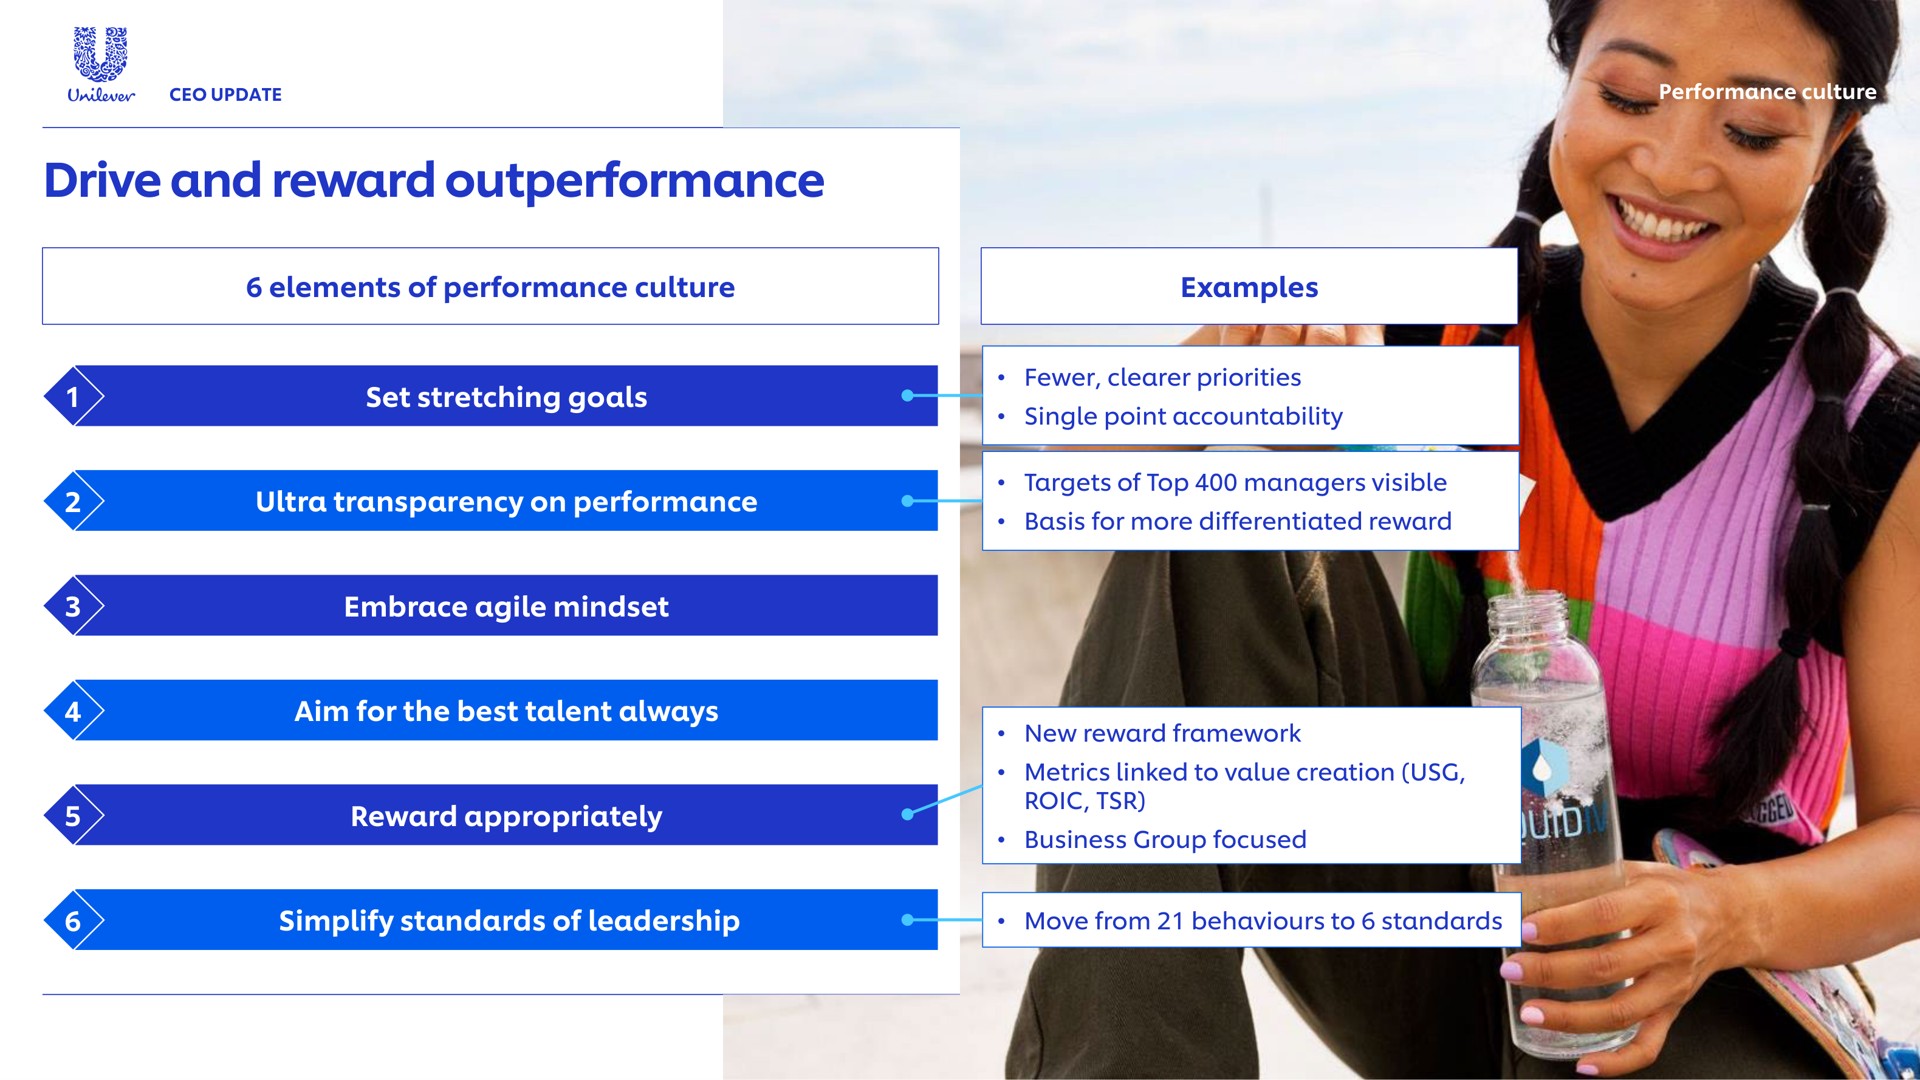 drive and reward elements of performance culture examples clearer priorities single point accountability business group focused new framework targets of top managers visible basis for more differentiated metrics linked to value creation move from behaviours to standards | Unilever